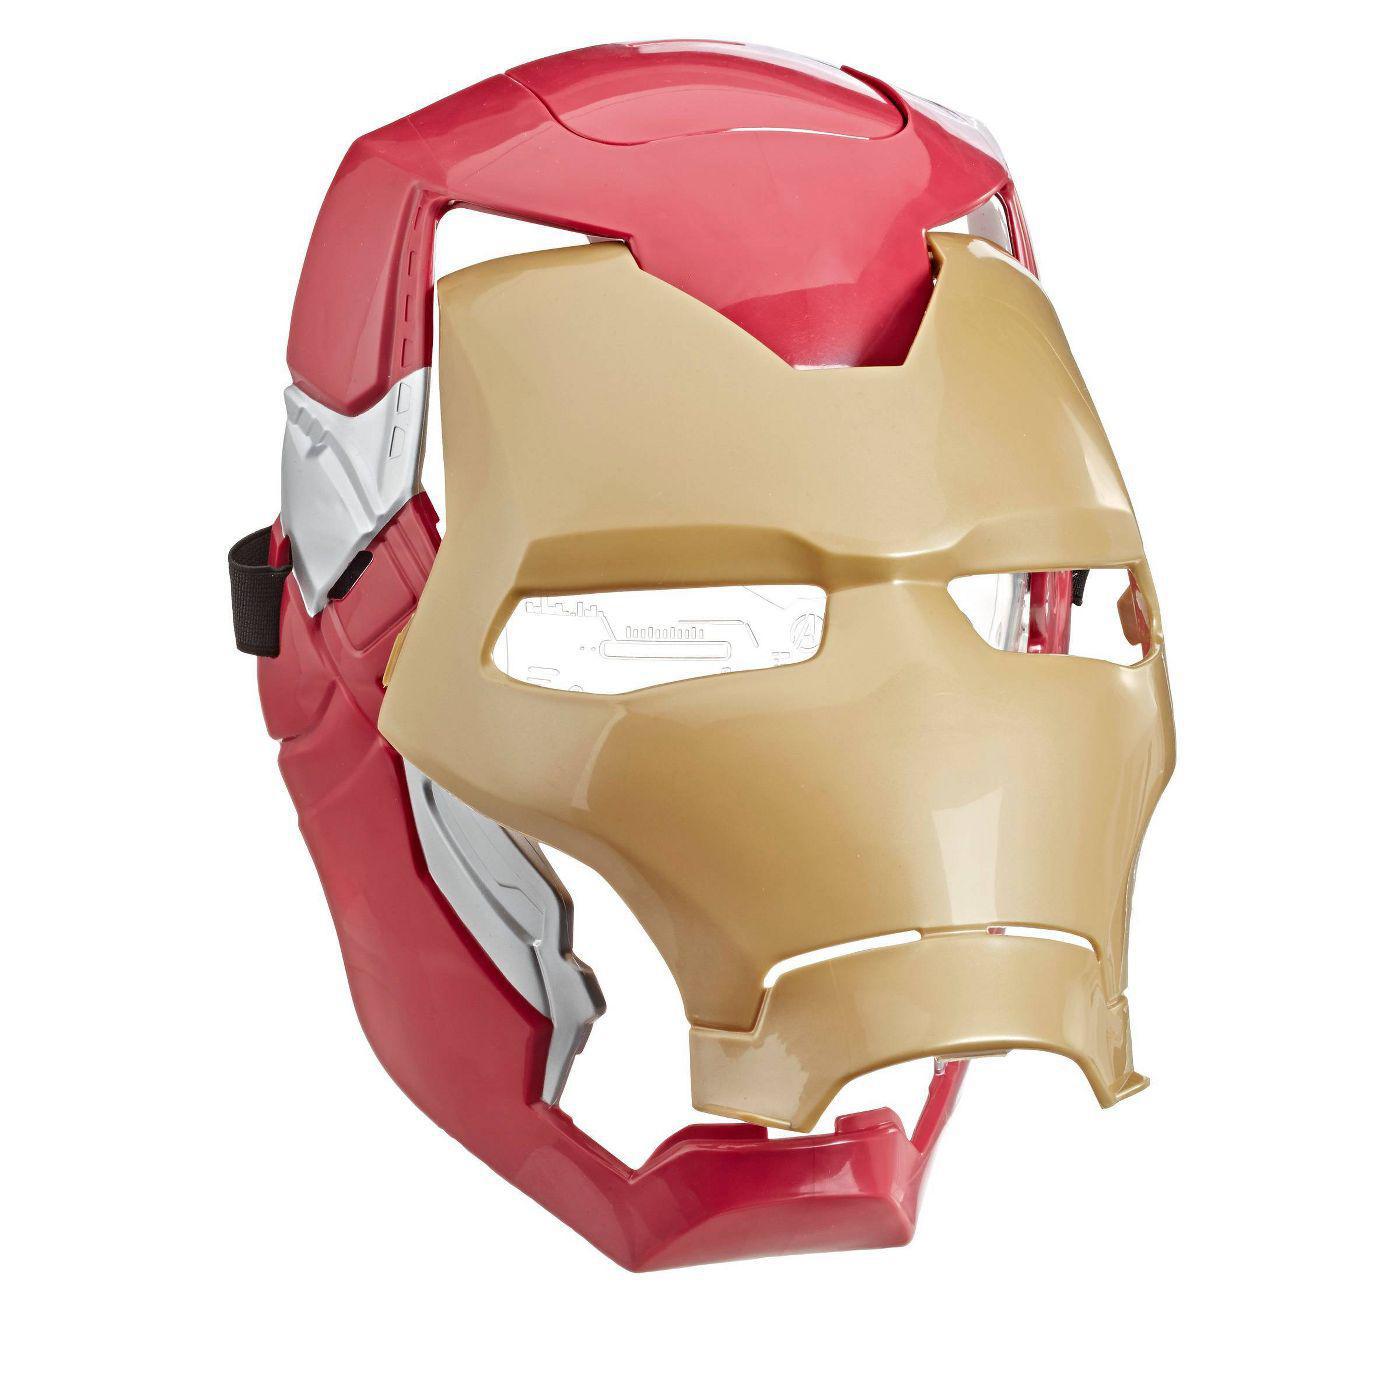 Avengers Marvel Iron Man Flip FX Mask with Flip-Activated Light Effects